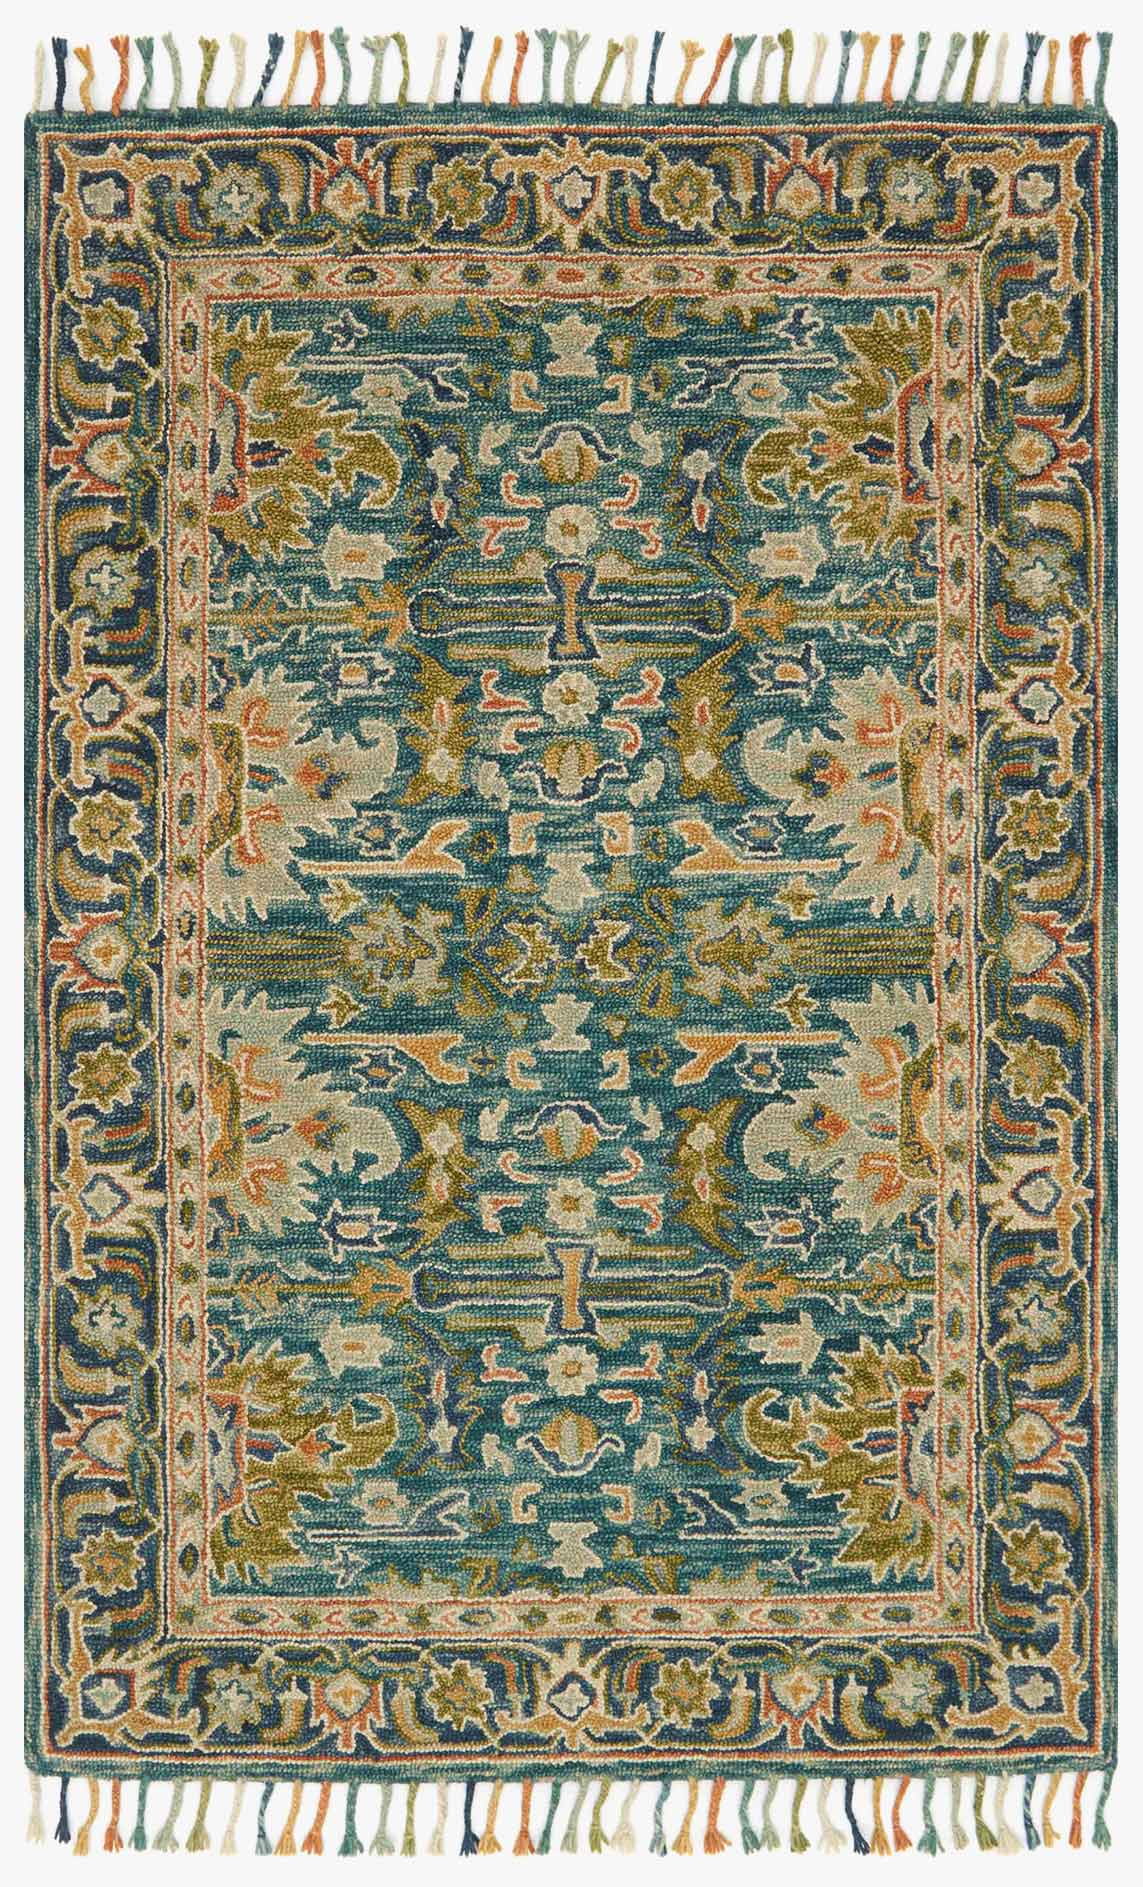 ZR-250: Wool rug - hand knotted